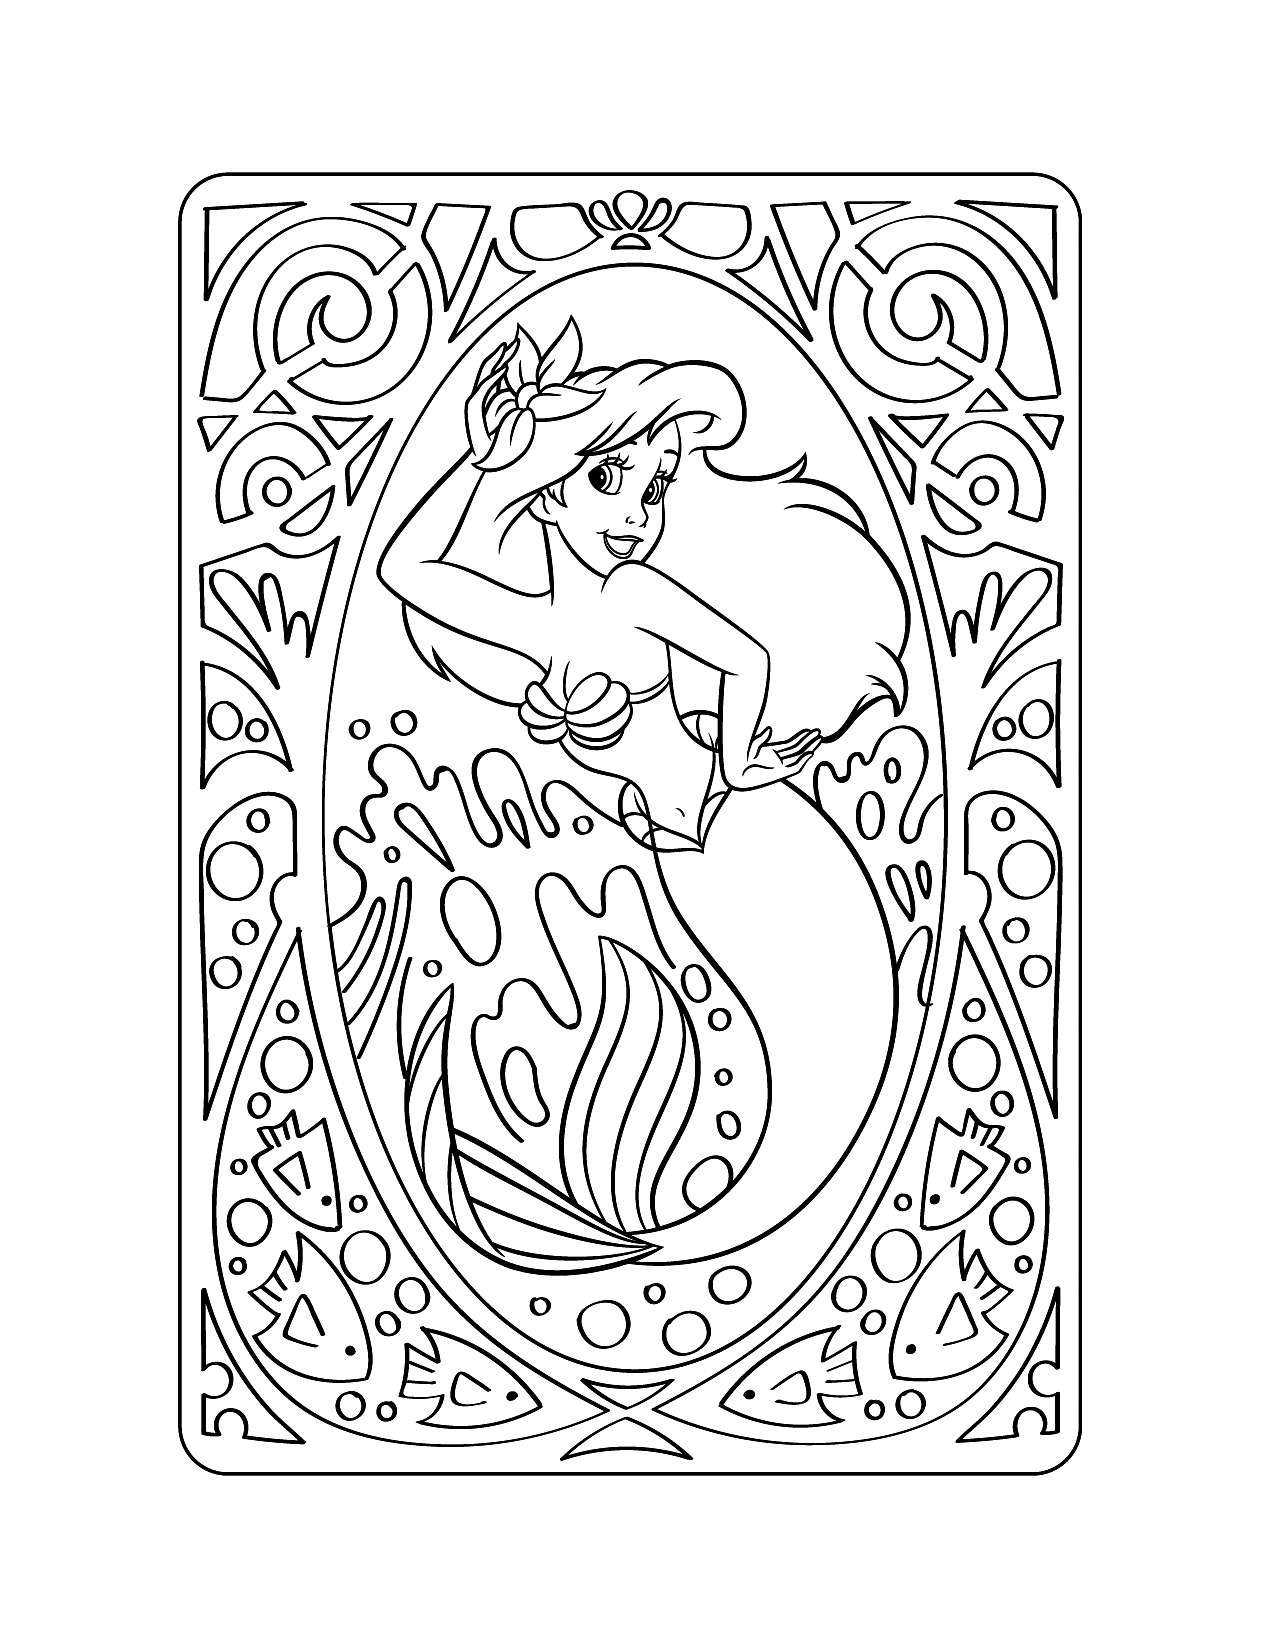 Arial Disney Coloring Page For Adults